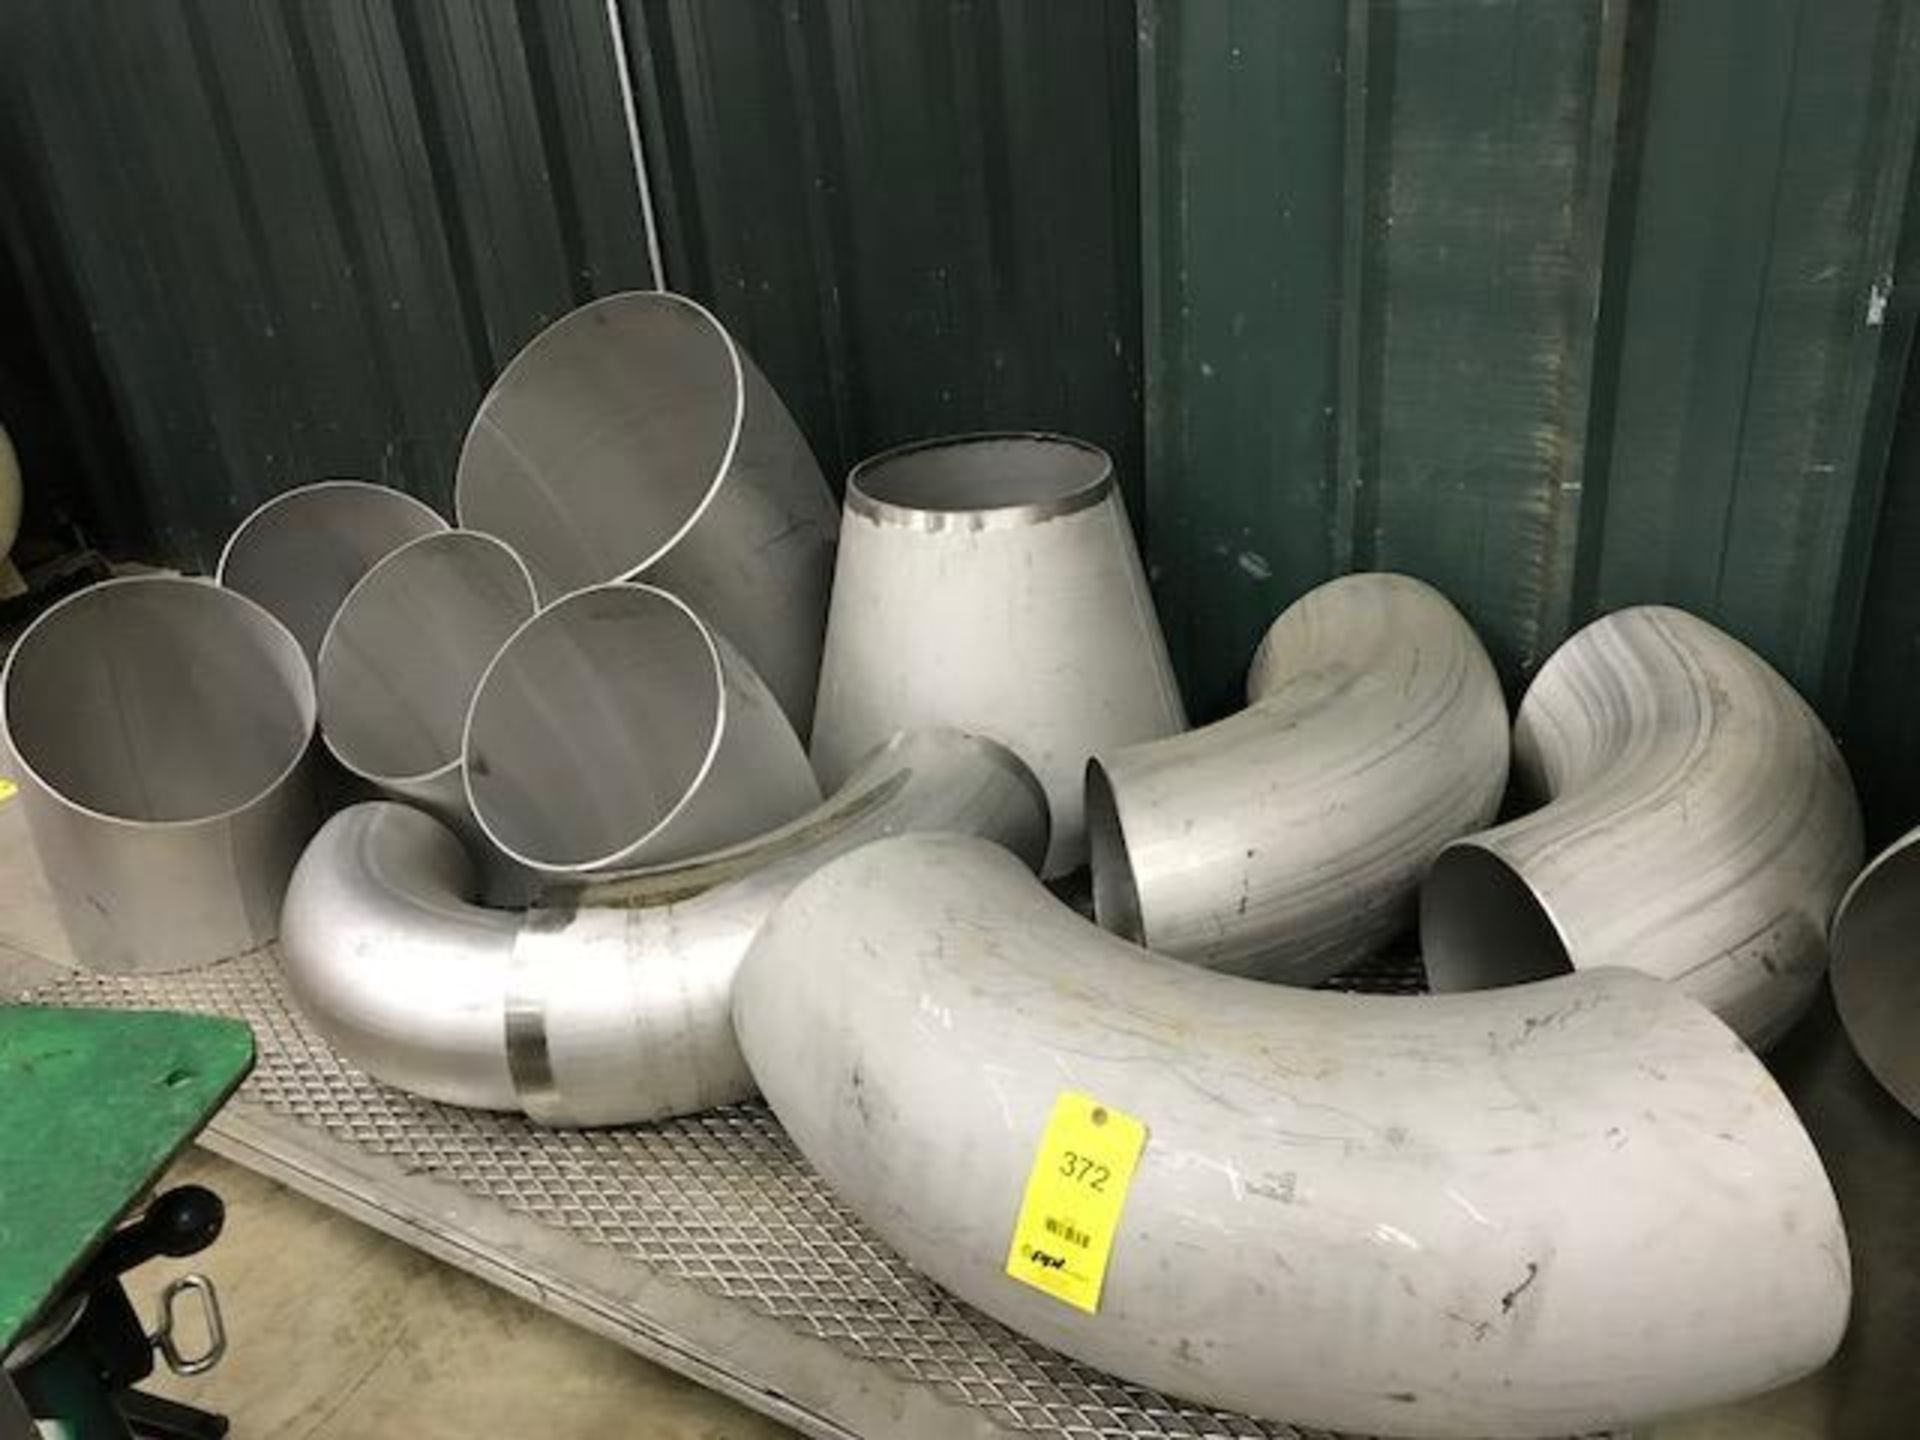 LOT: Stainless Steel Elbows including: (4) 14 in. x 45°, (3) 14 in. x 90°, (1) 10 in. x 90°, (1) 8